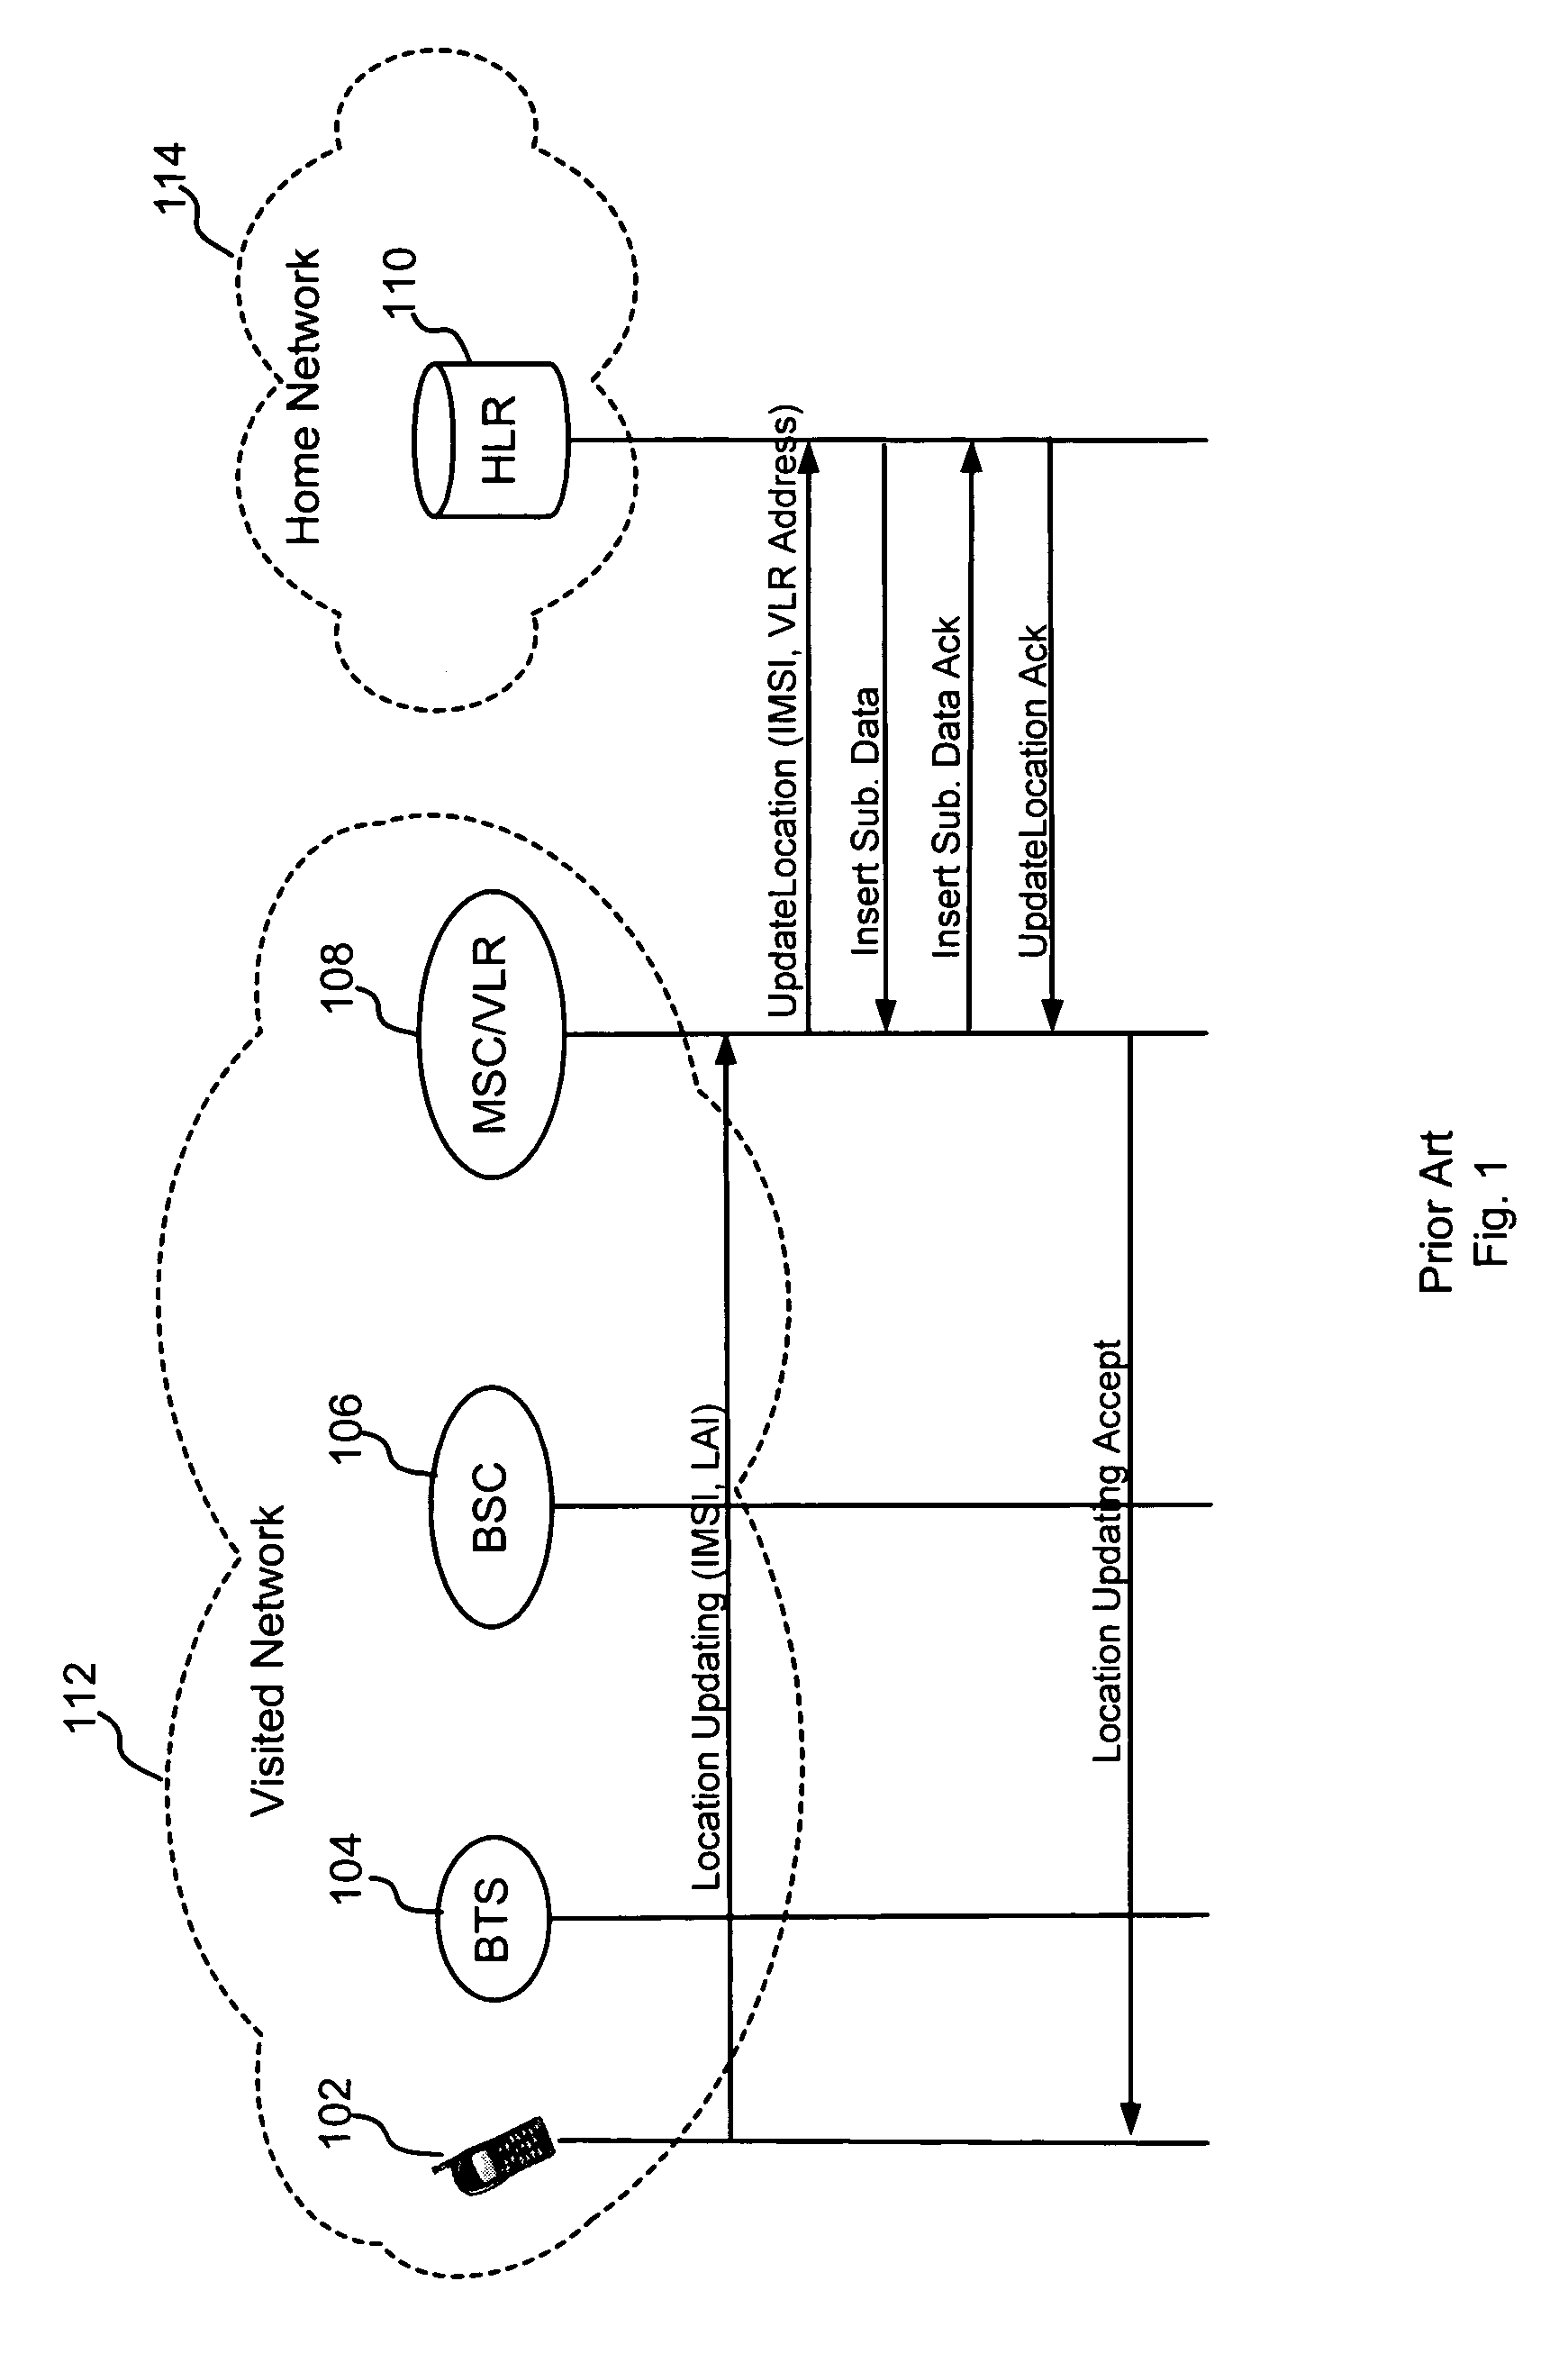 System and method for controlling domestic roaming